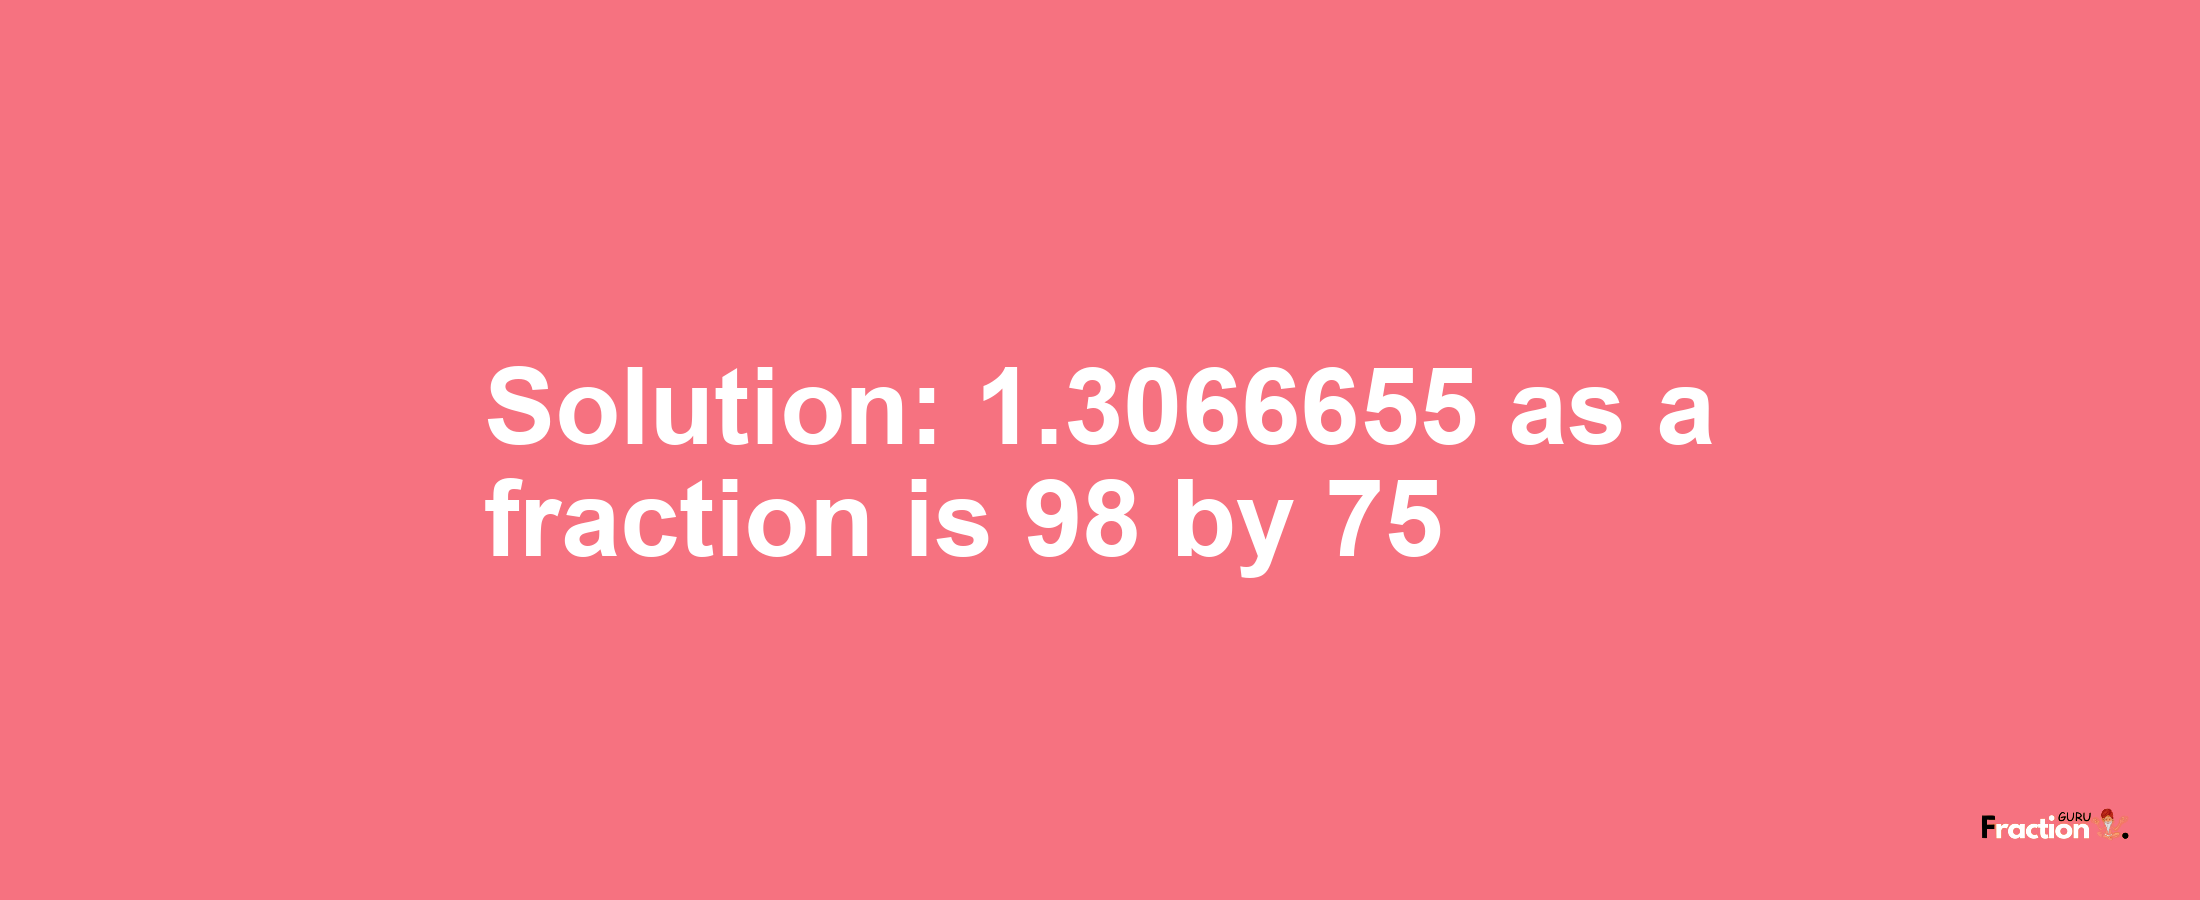 Solution:1.3066655 as a fraction is 98/75